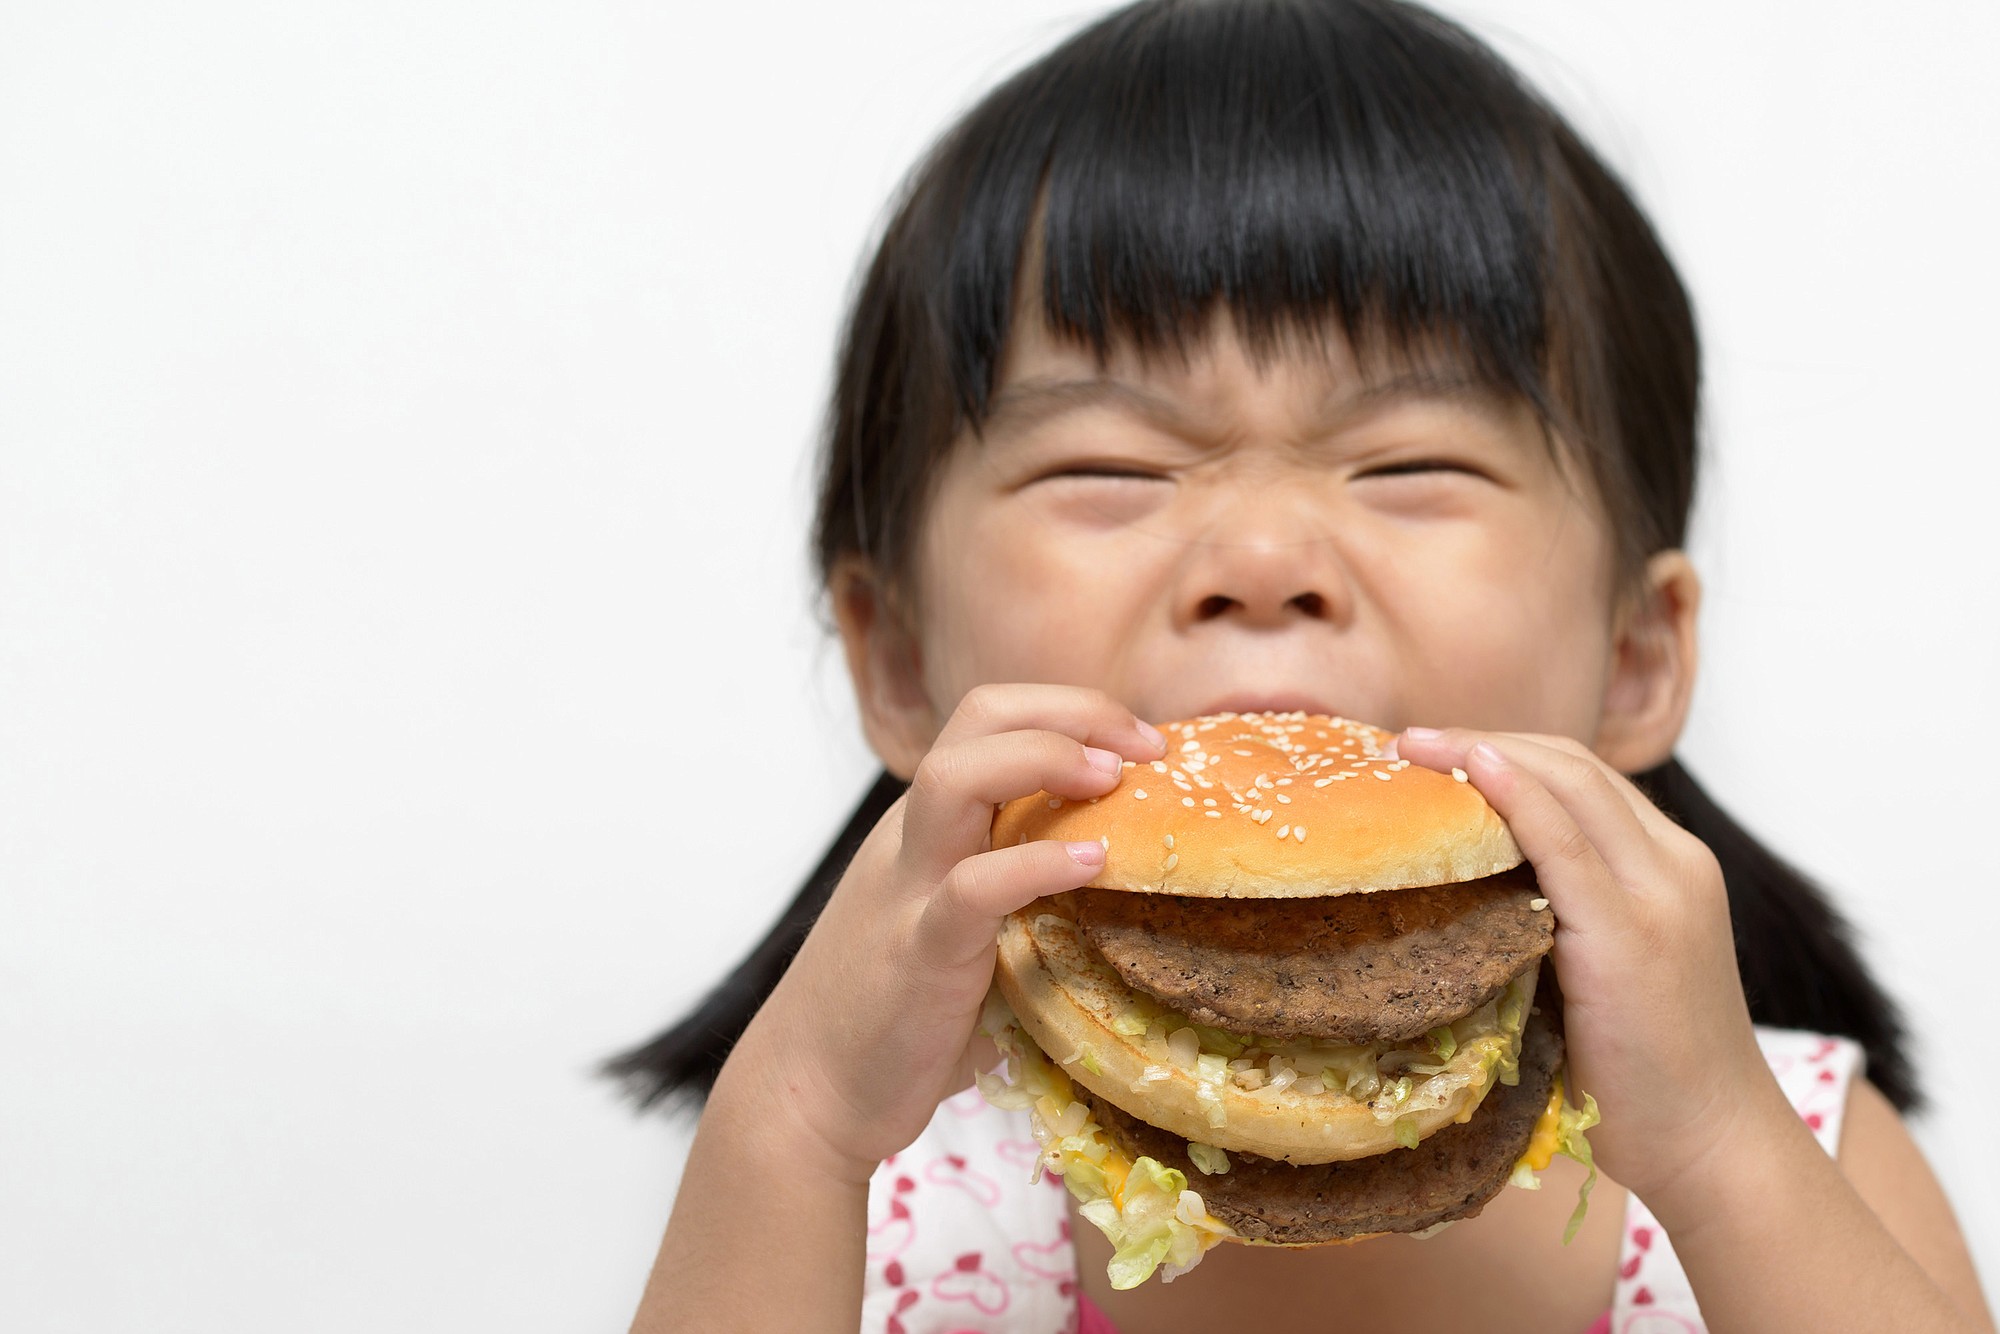 A new study suggests that adult diseases can strike children because of poor diet and obesity.